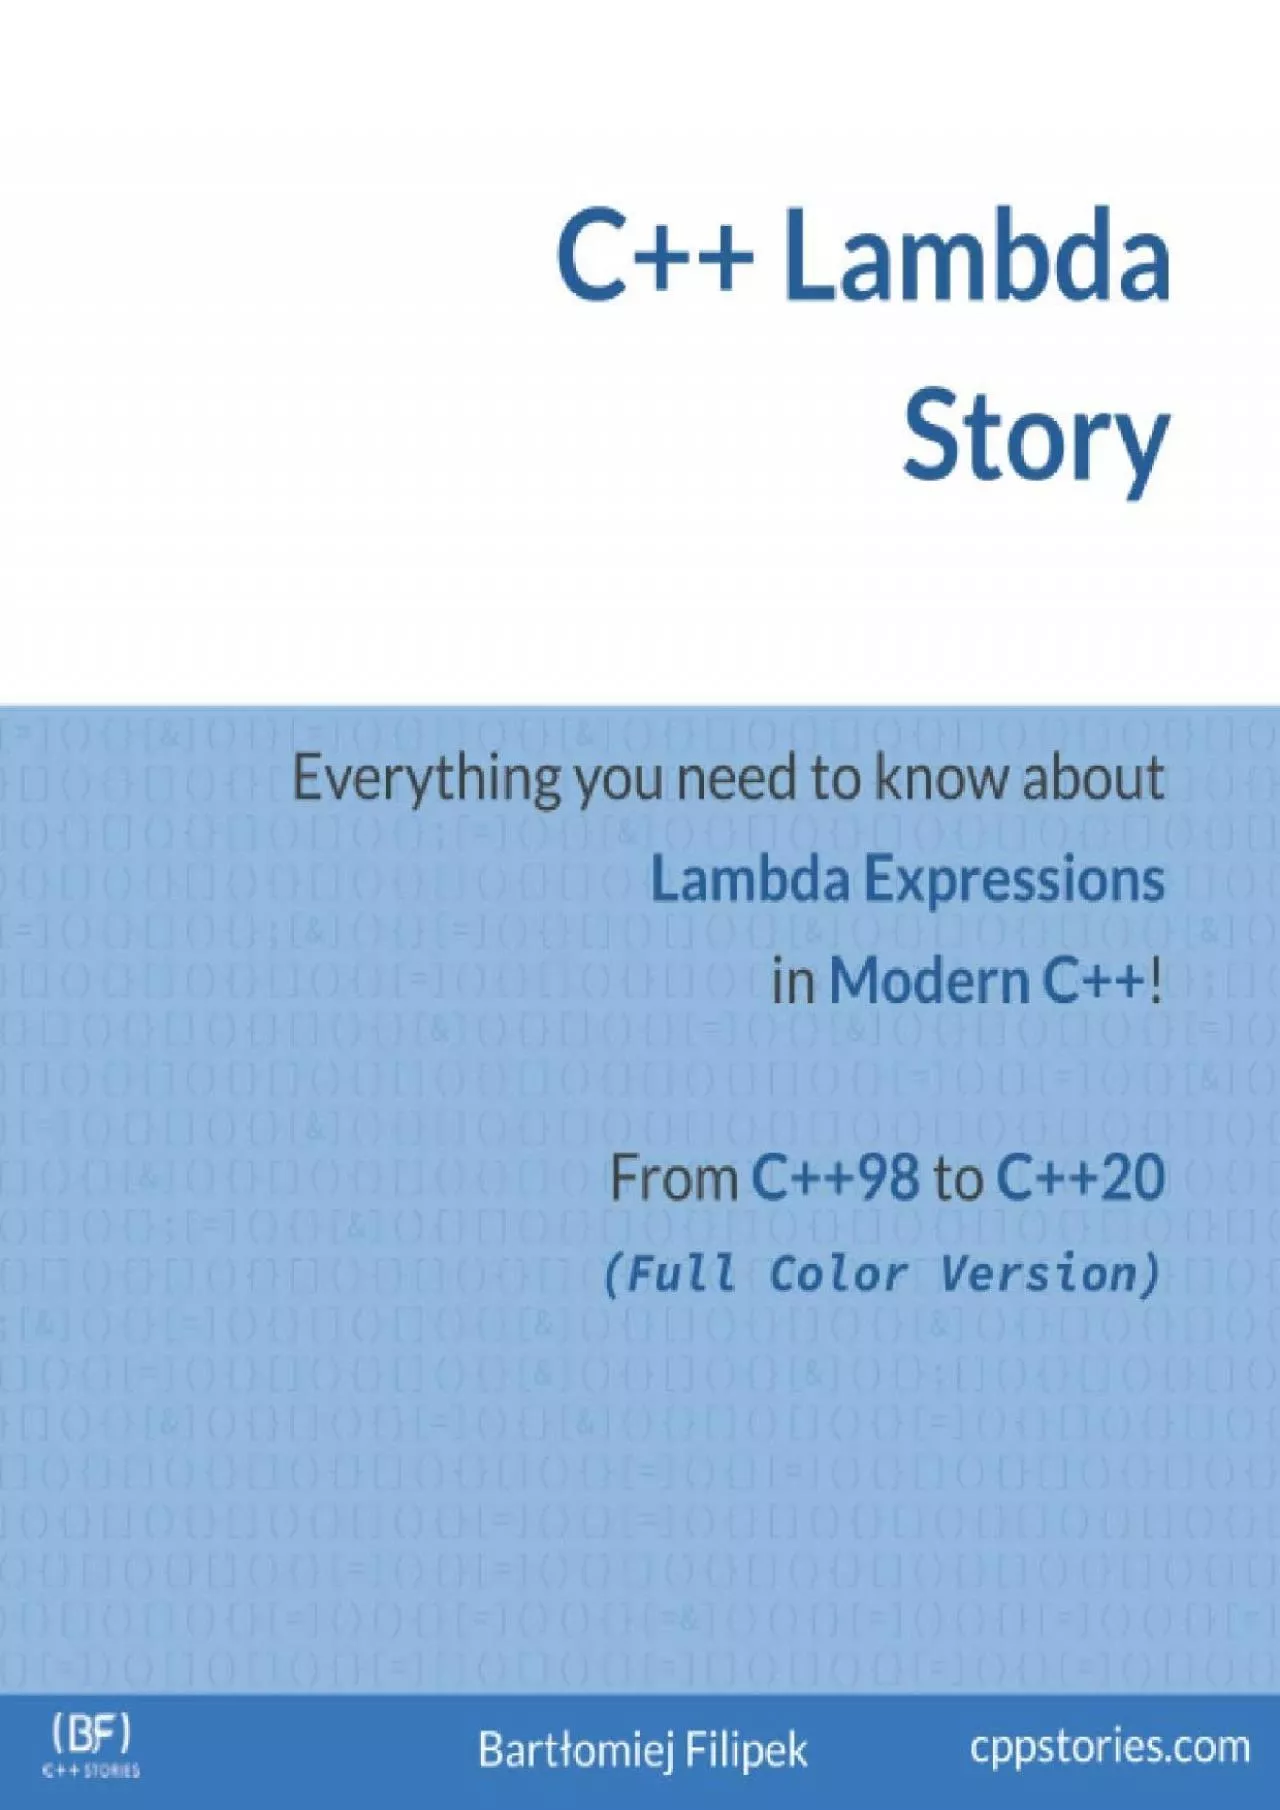 [PDF]-C++ Lambda Story (Full Color): Everything you need to know about Lambda Expressions